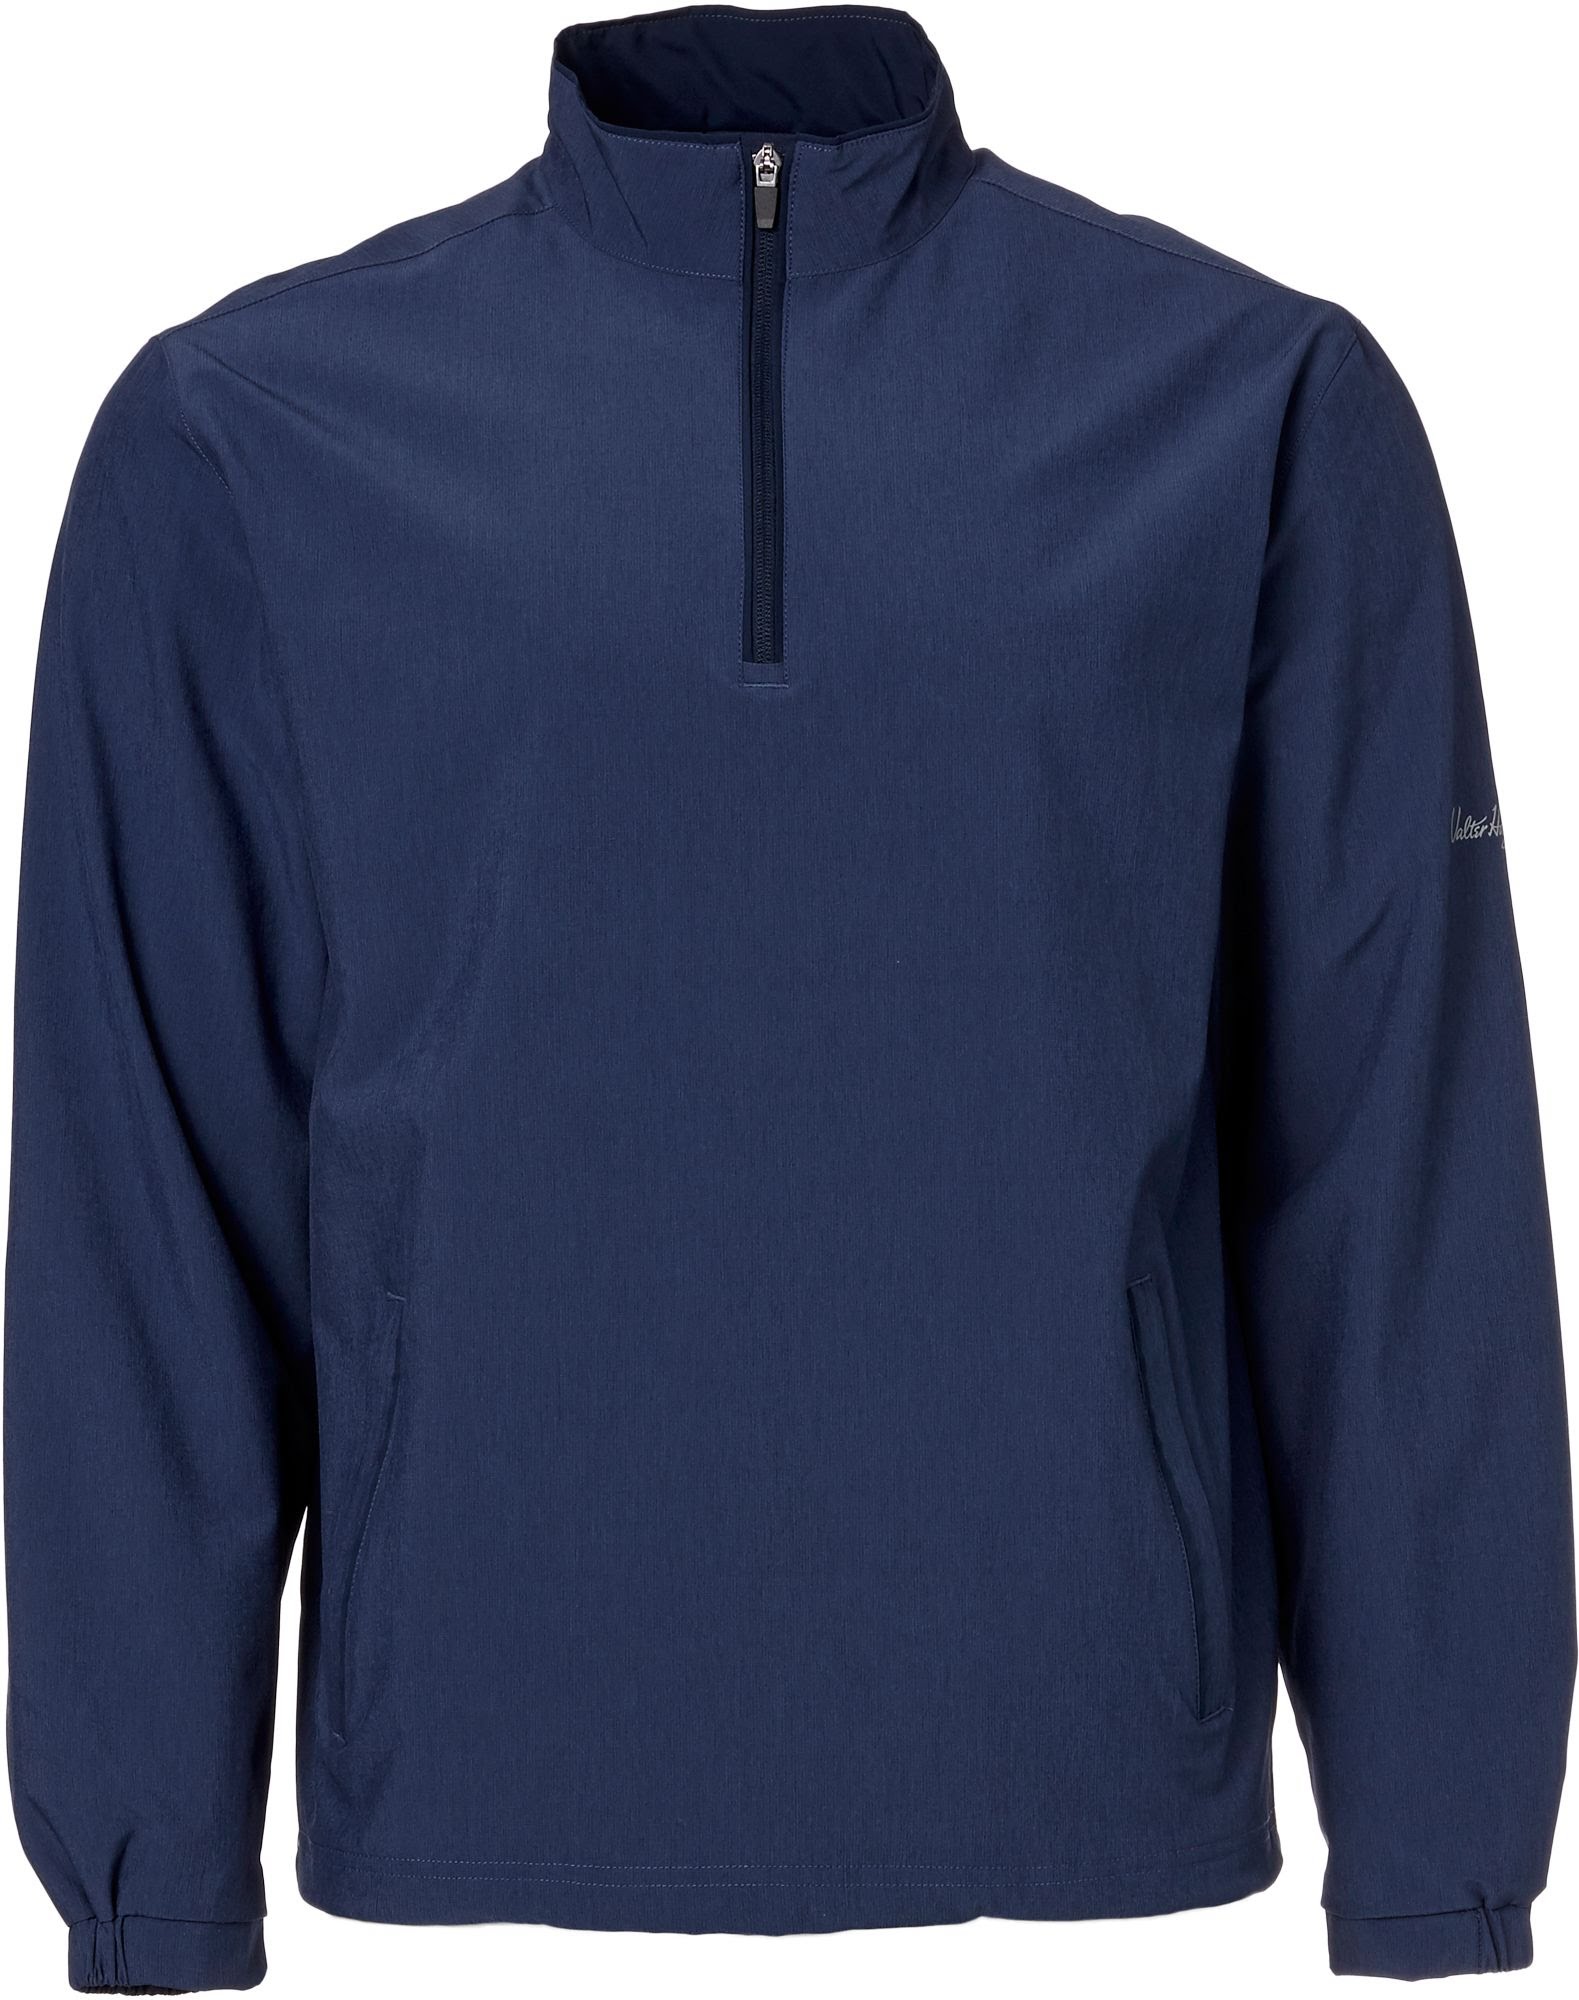 Golf Wind Breaker, Mid Sleeve, Specify Color/Size - Each